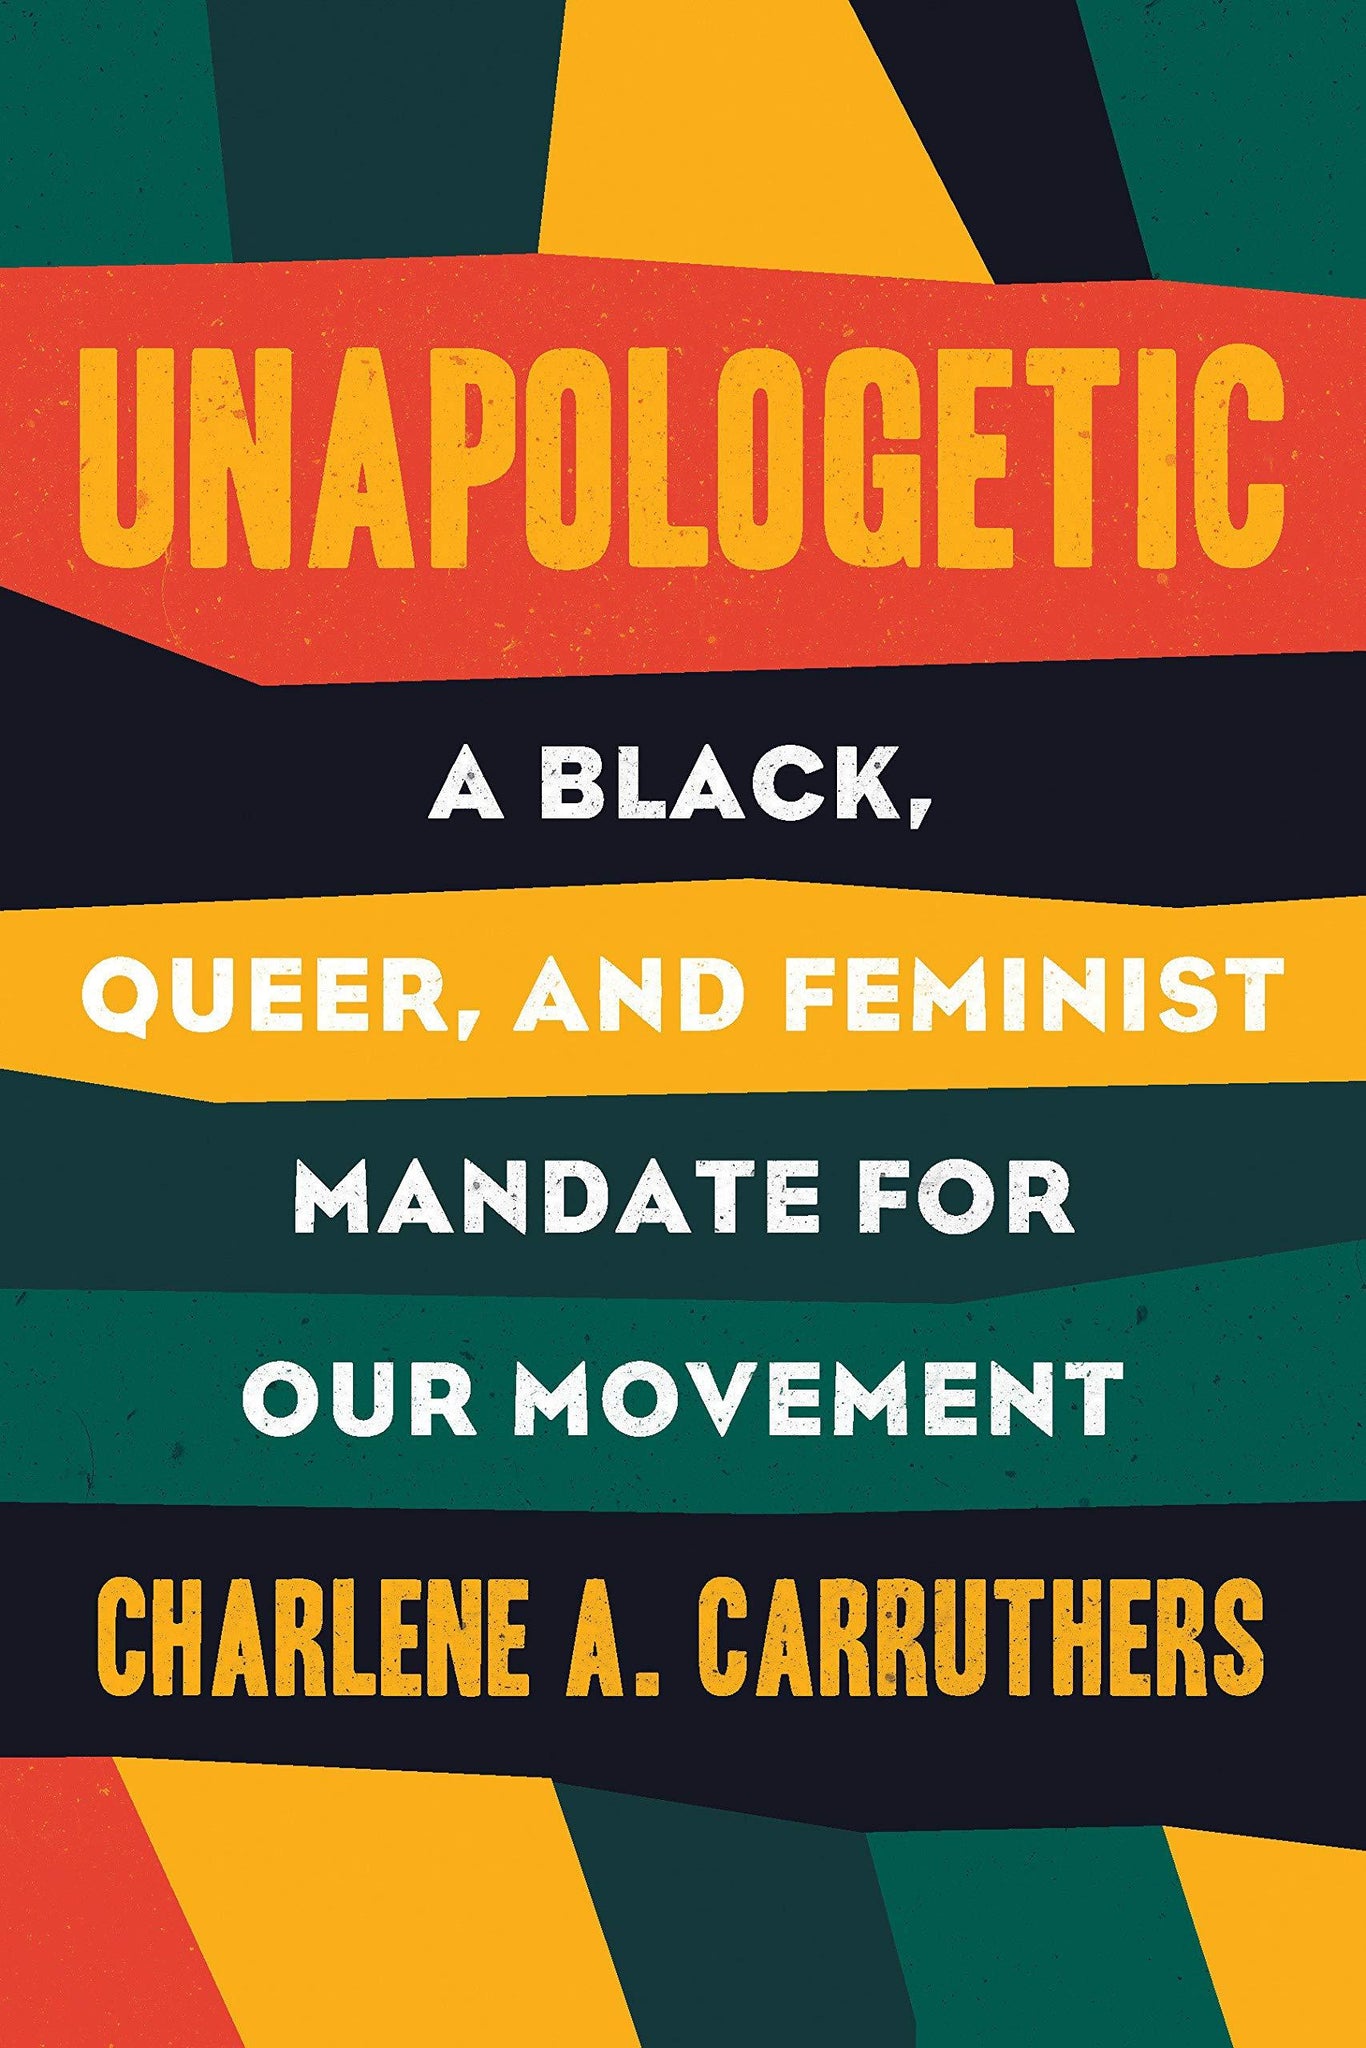 Unapologetic: A Black, Queer, and Feminist Mandate for Radical Movements - ShopQueer.co